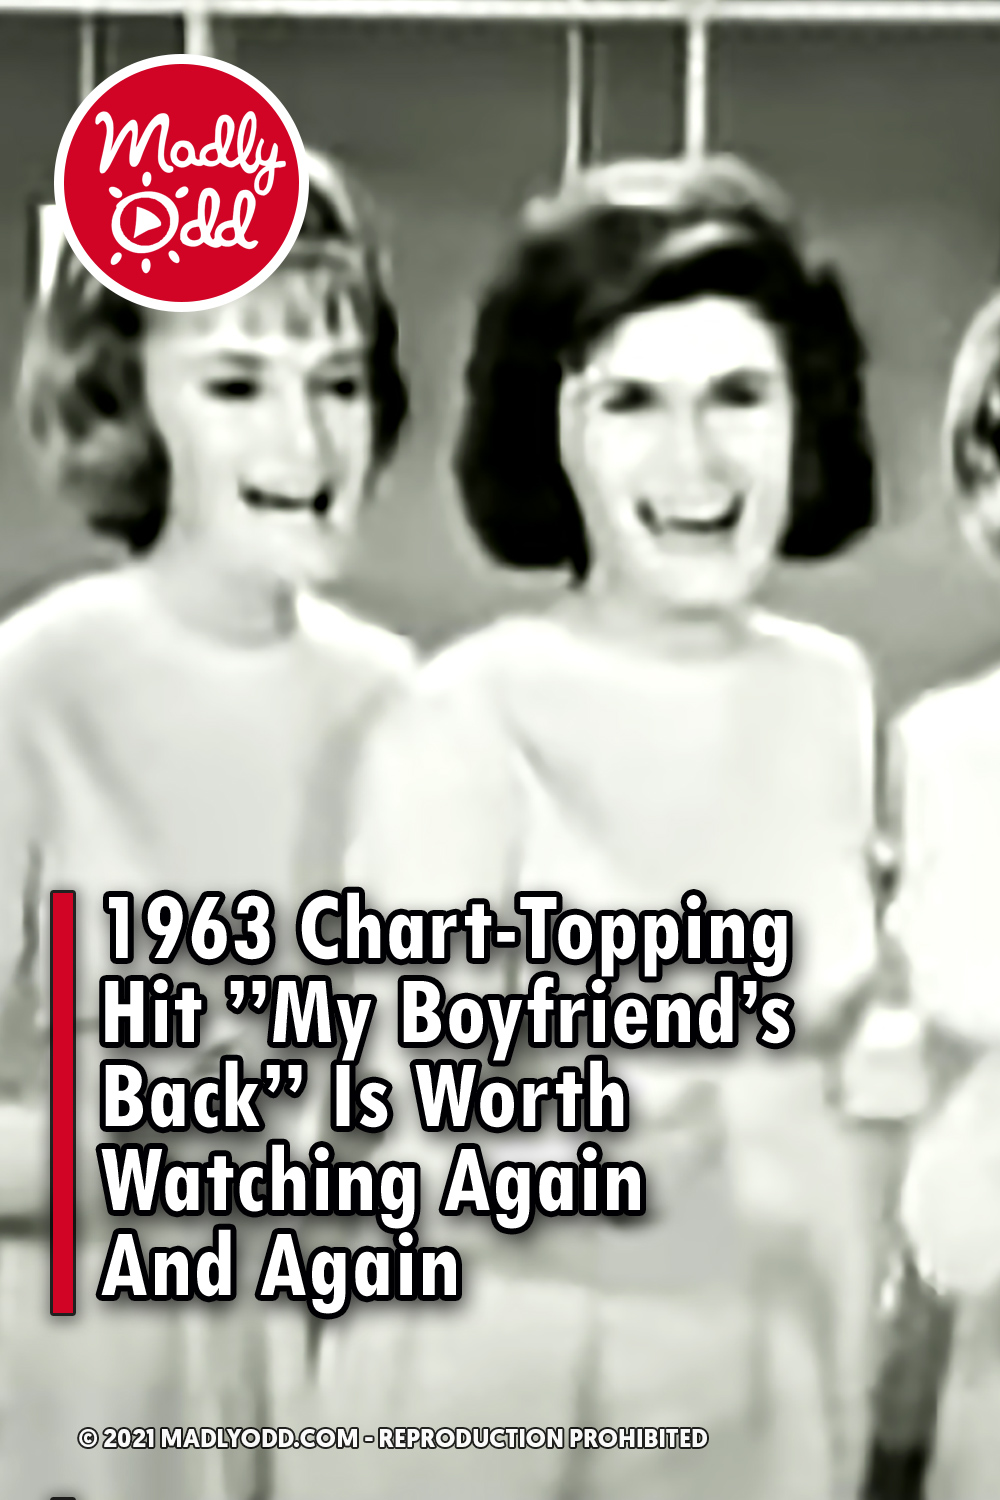 1963 Chart-Topping Hit ”My Boyfriend’s Back” Is Worth Watching Again And Again